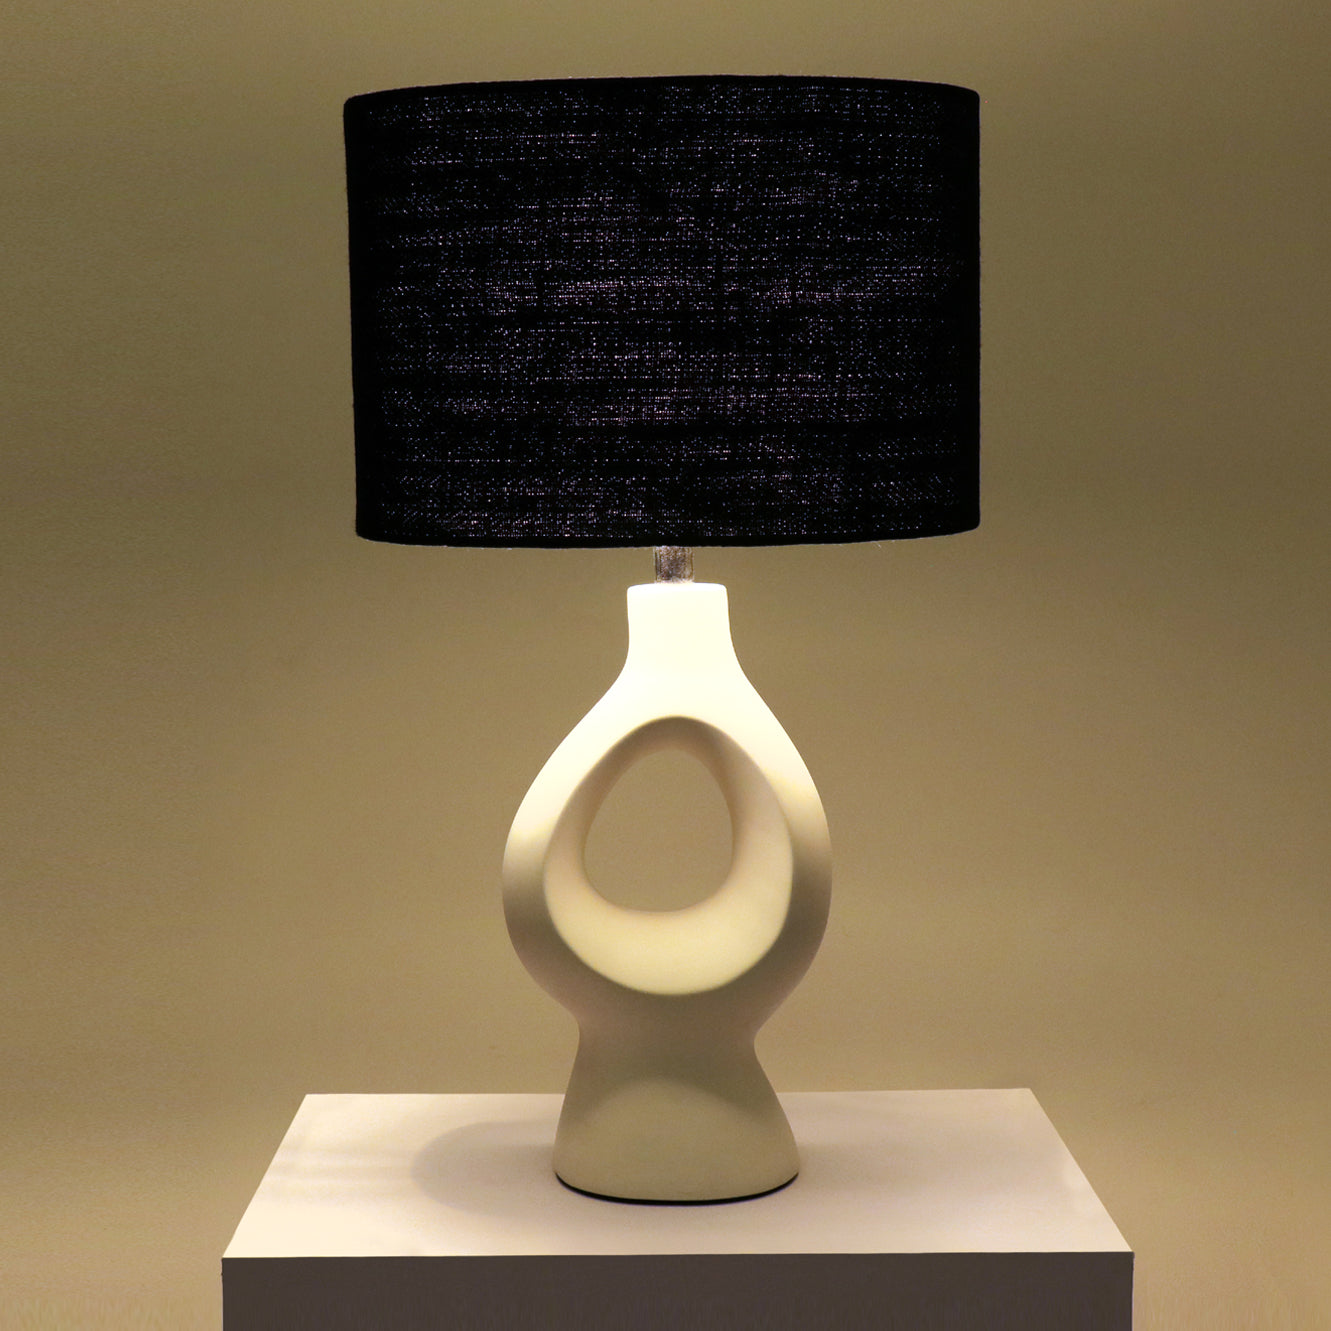 Void Cermamic Table Lamp